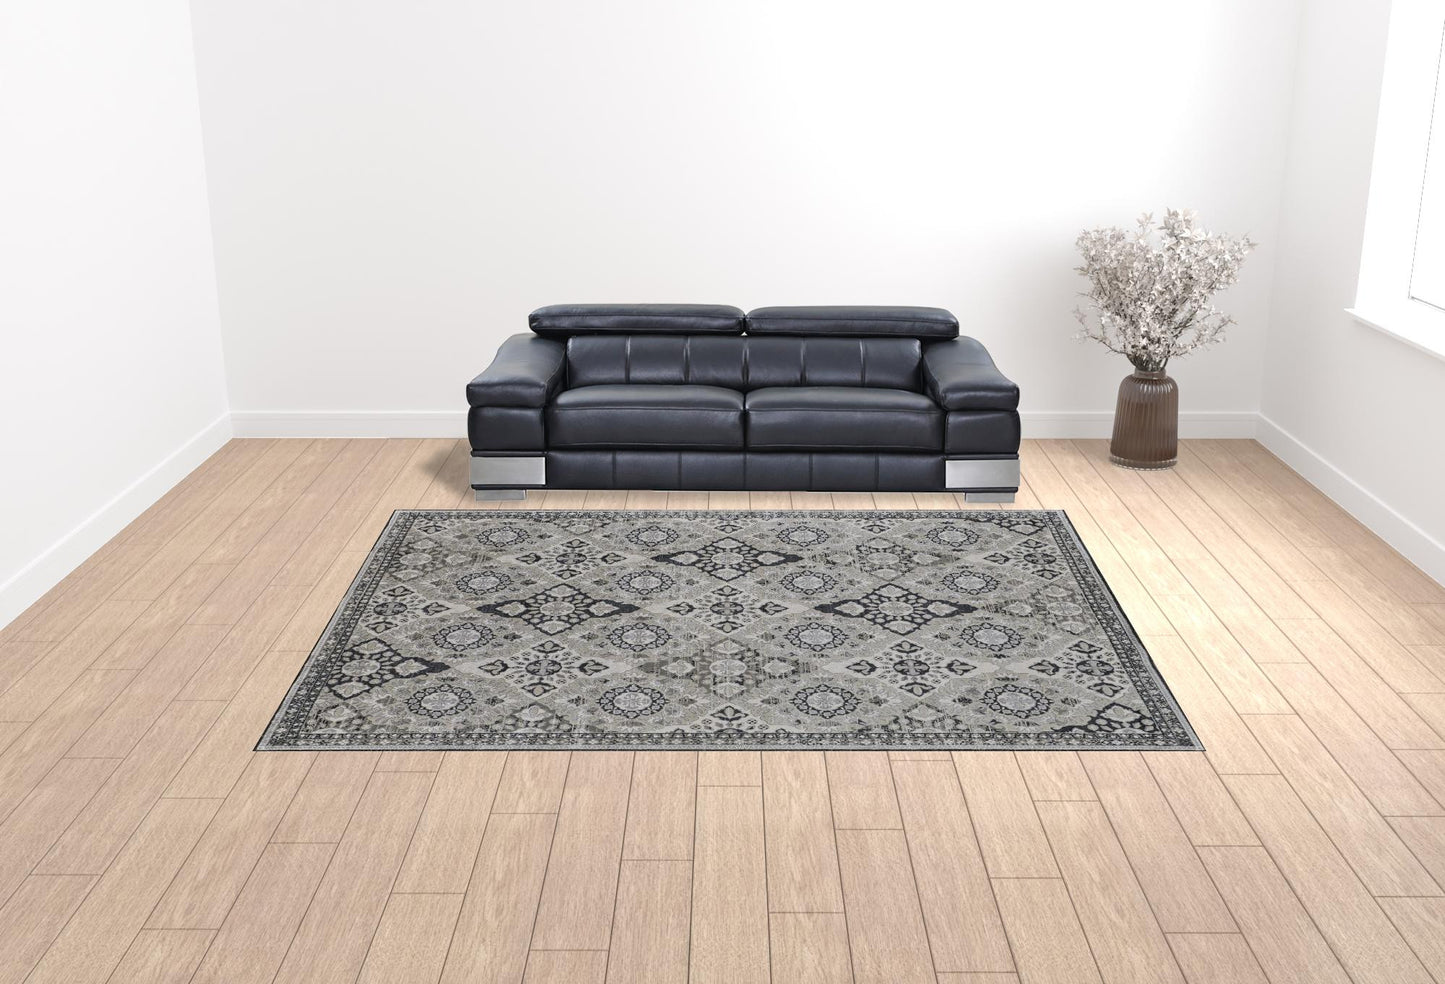 4' X 6' Gray And Black Abstract Power Loom Area Rug